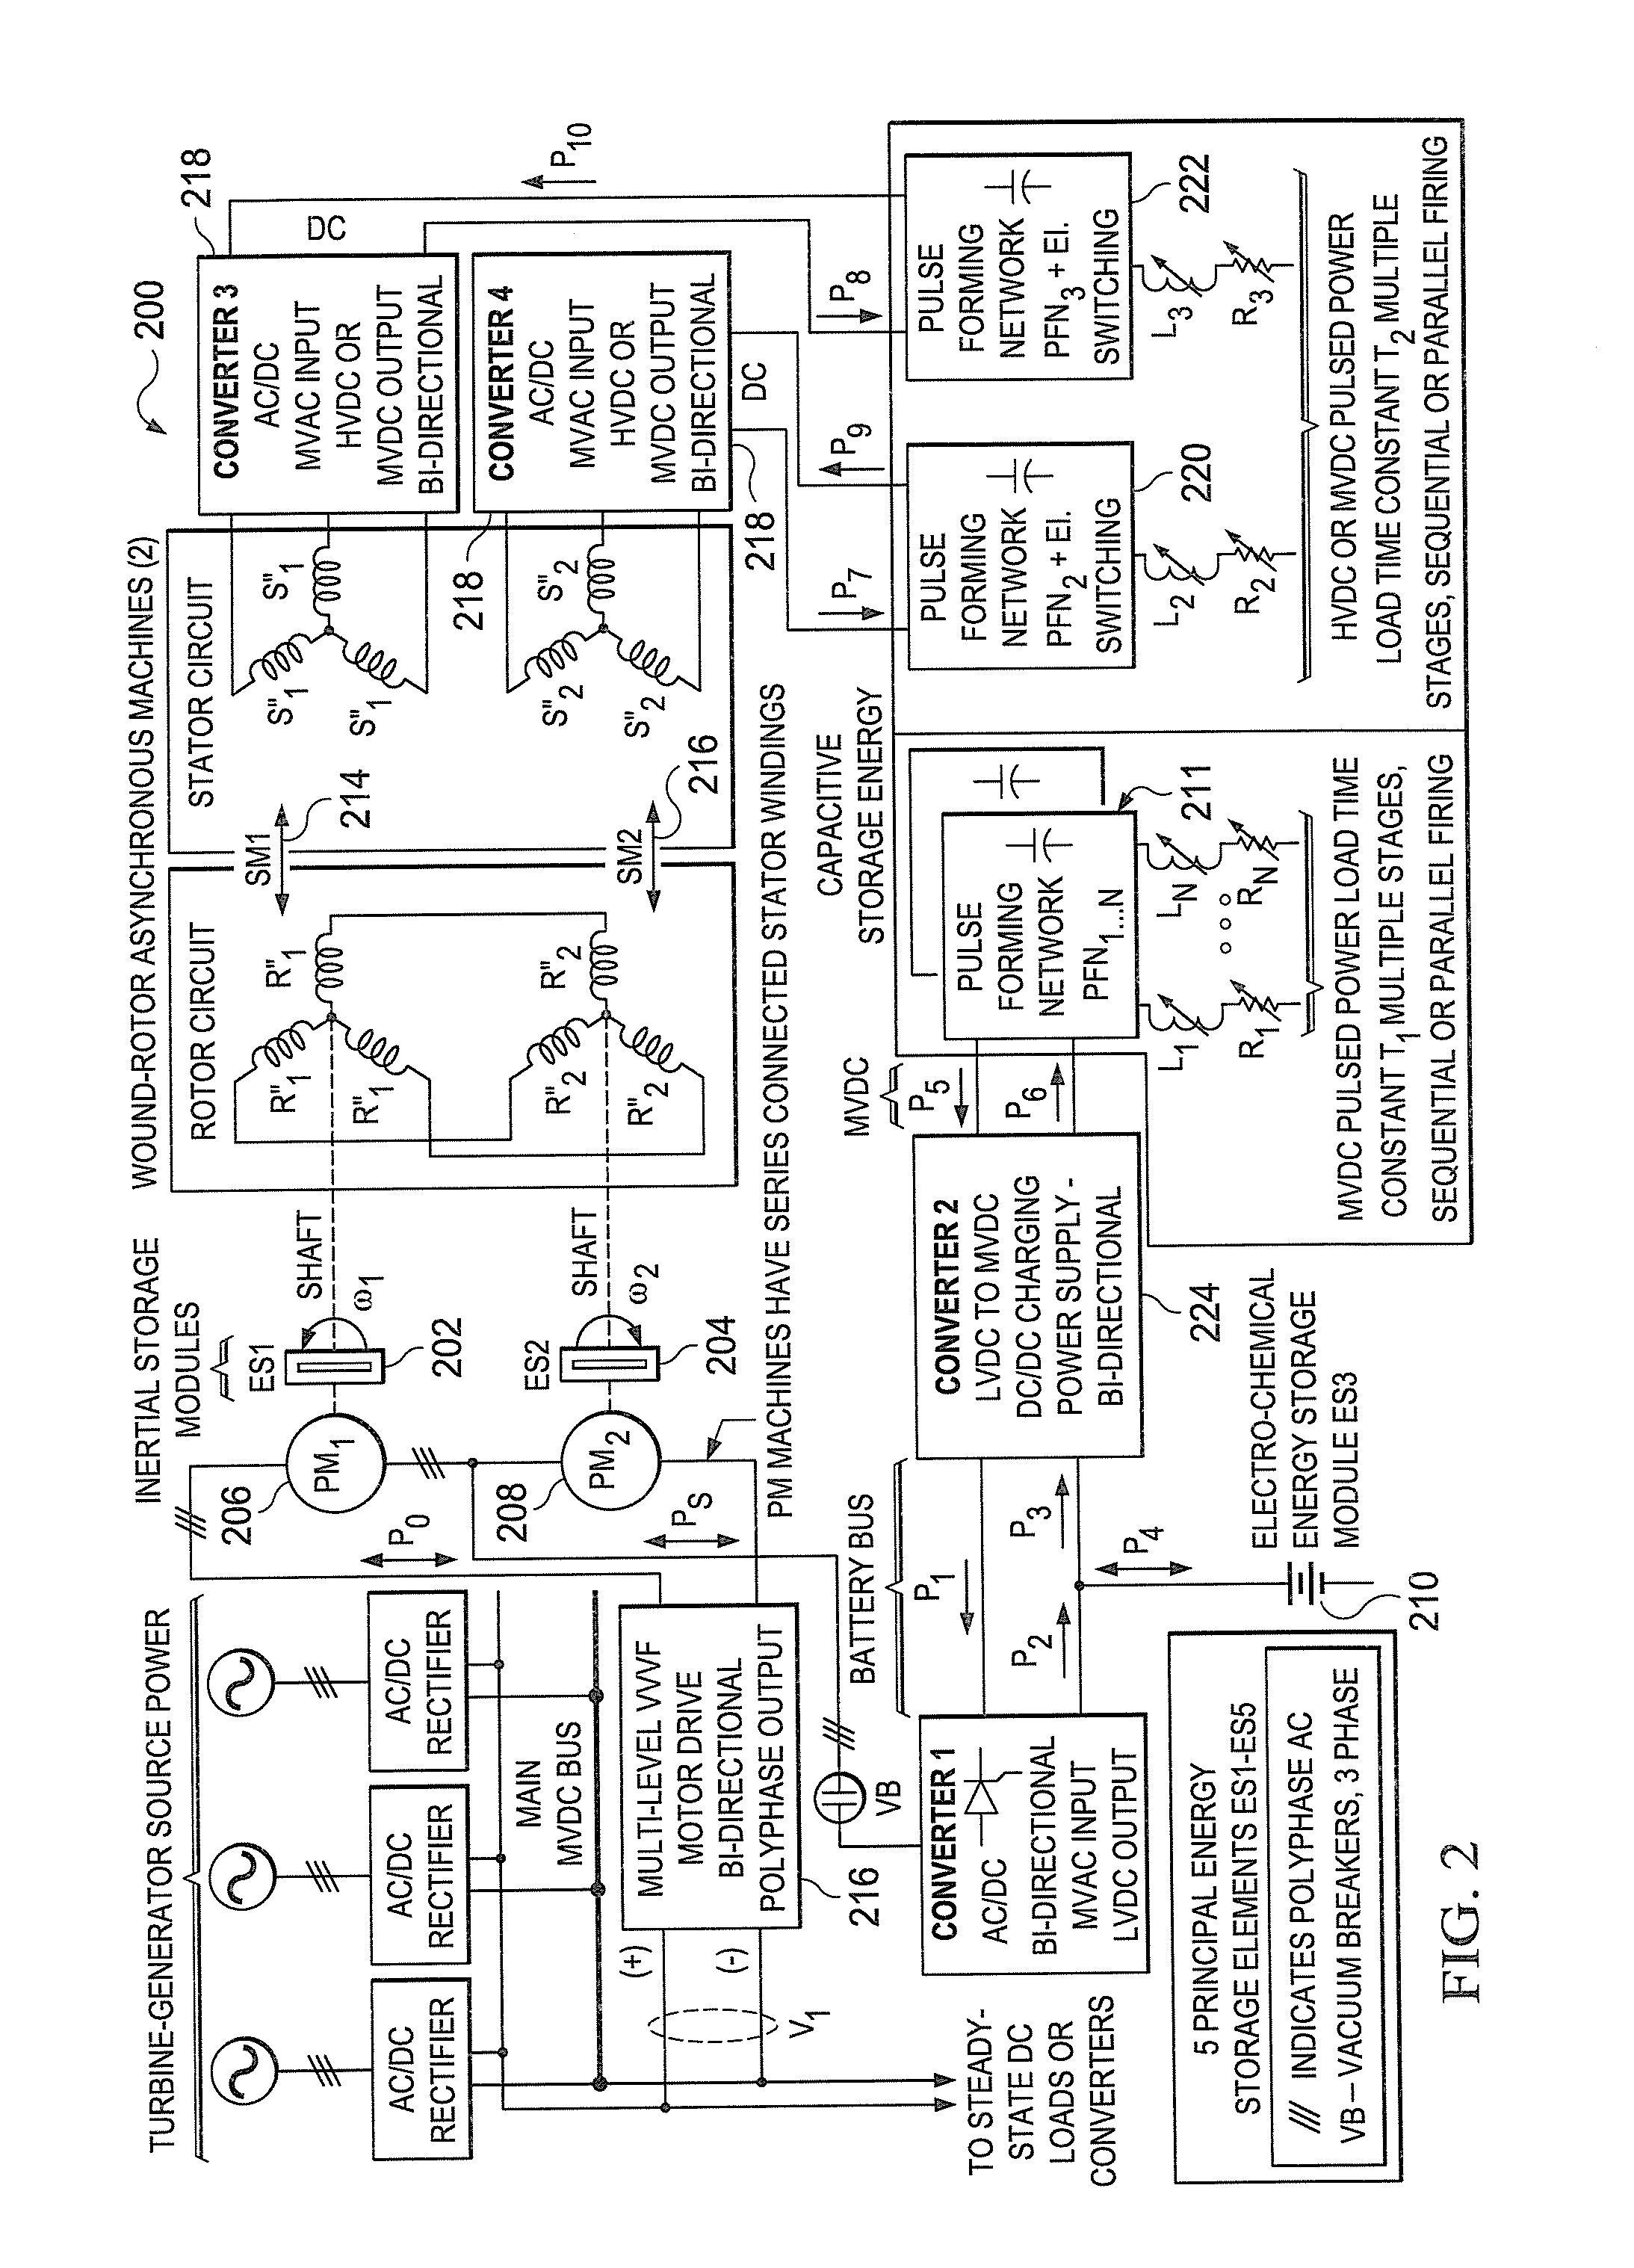 System and method for parallel configuration of hybrid energy storage module